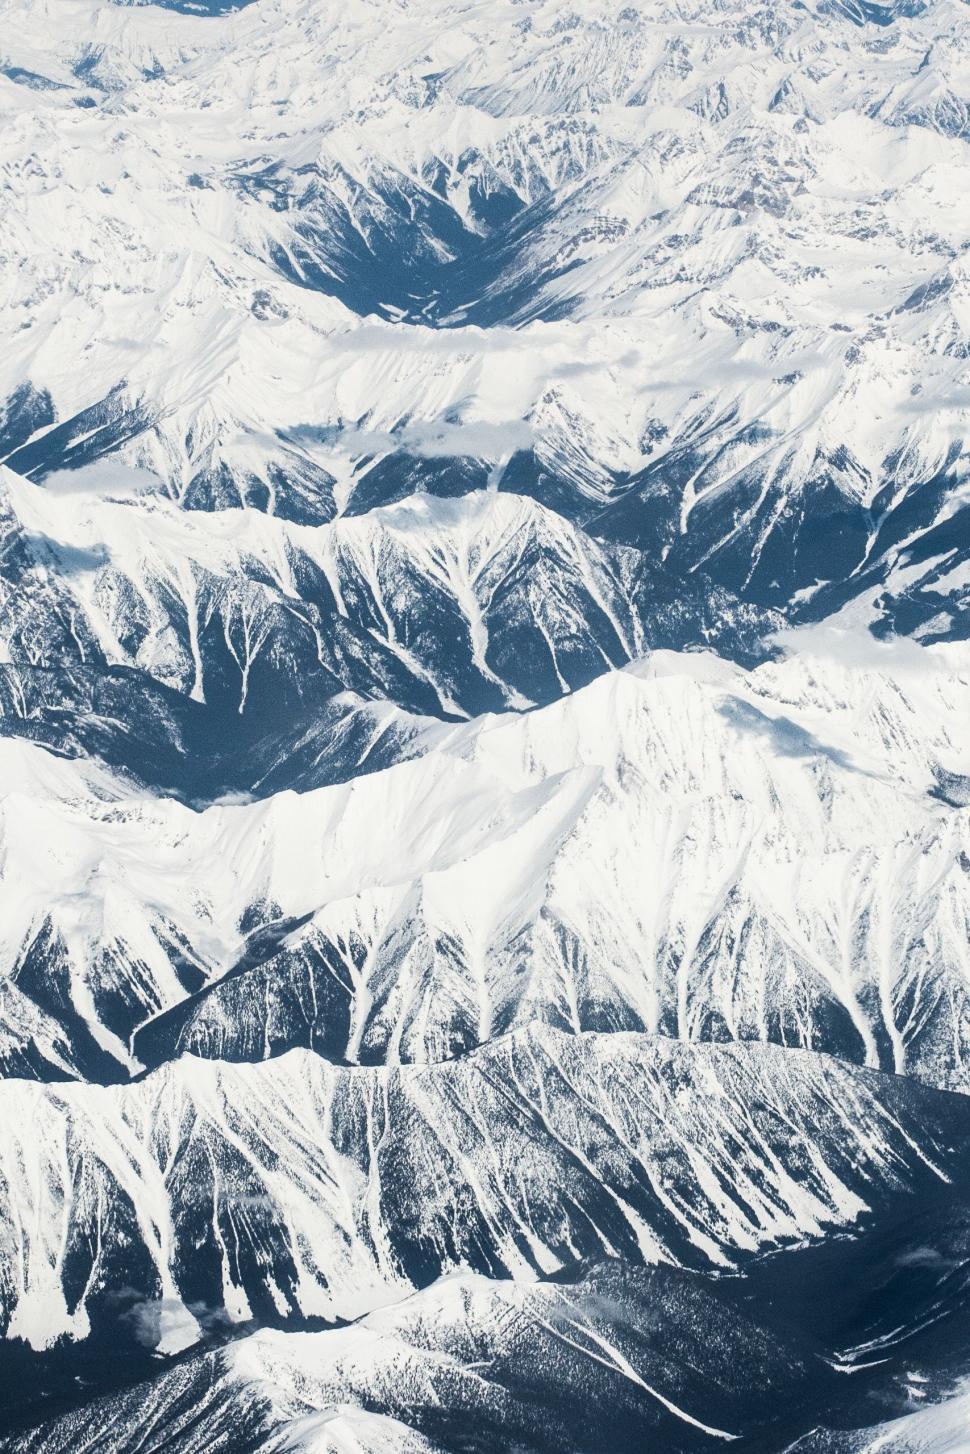 Free Image of Aerial View of Snow Covered Mountains From Airplane 